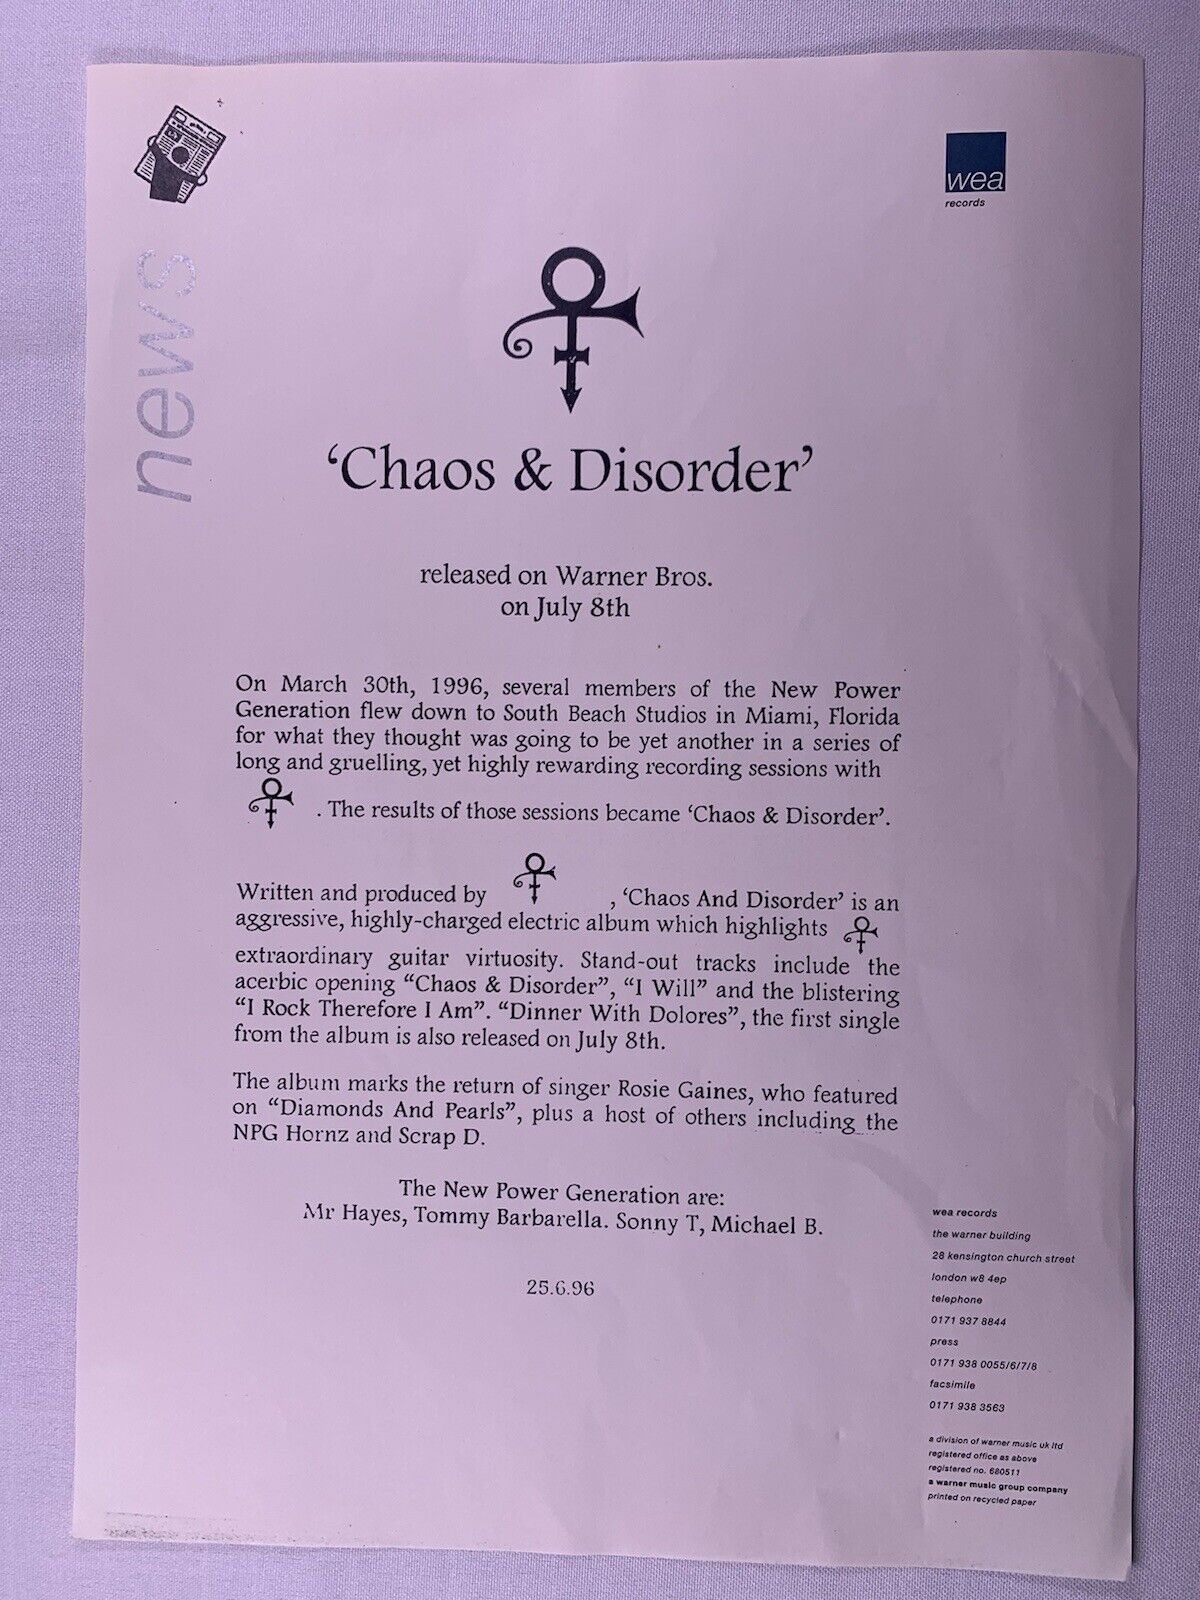 Prince Press Release Original Wea Records Chaos And Order 1996